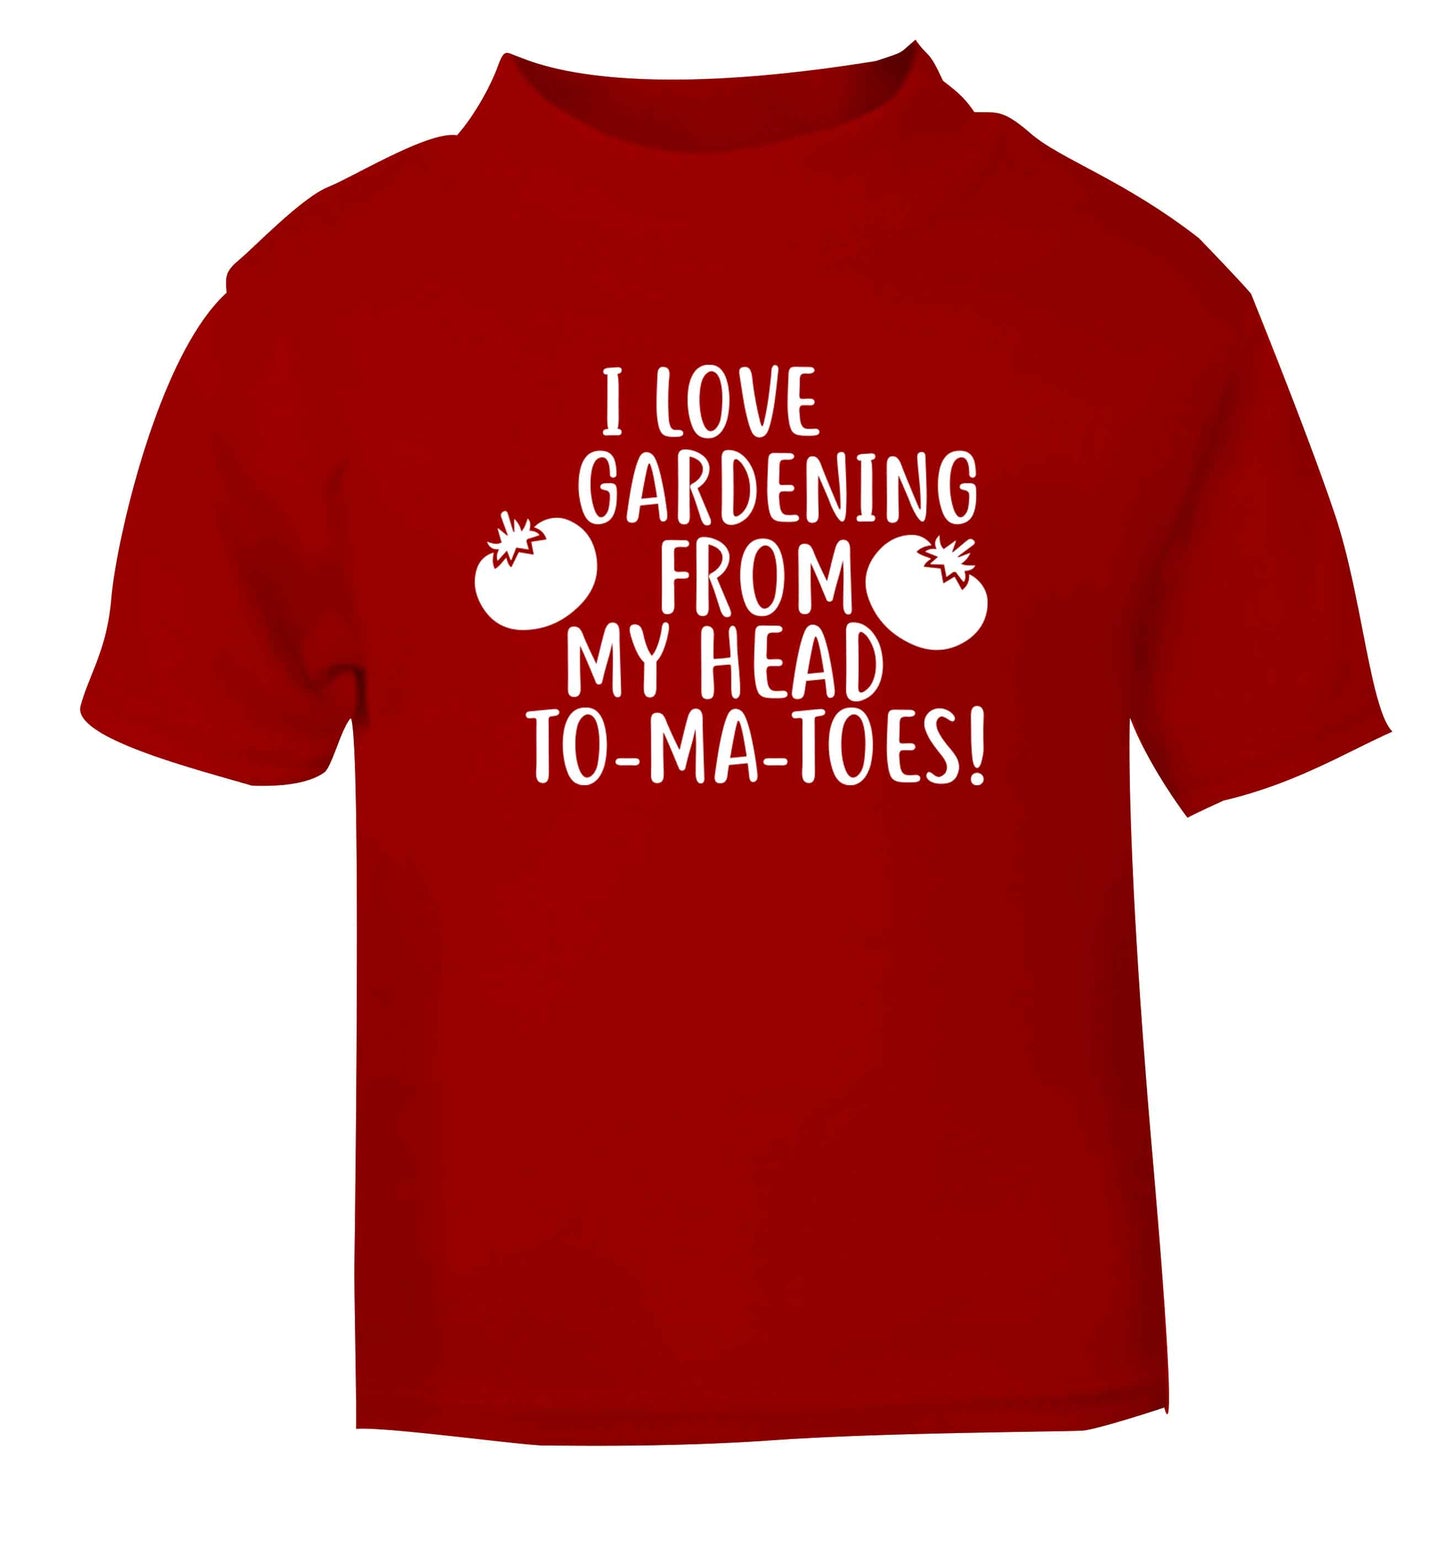 I love gardening from my head to-ma-toes red Baby Toddler Tshirt 2 Years